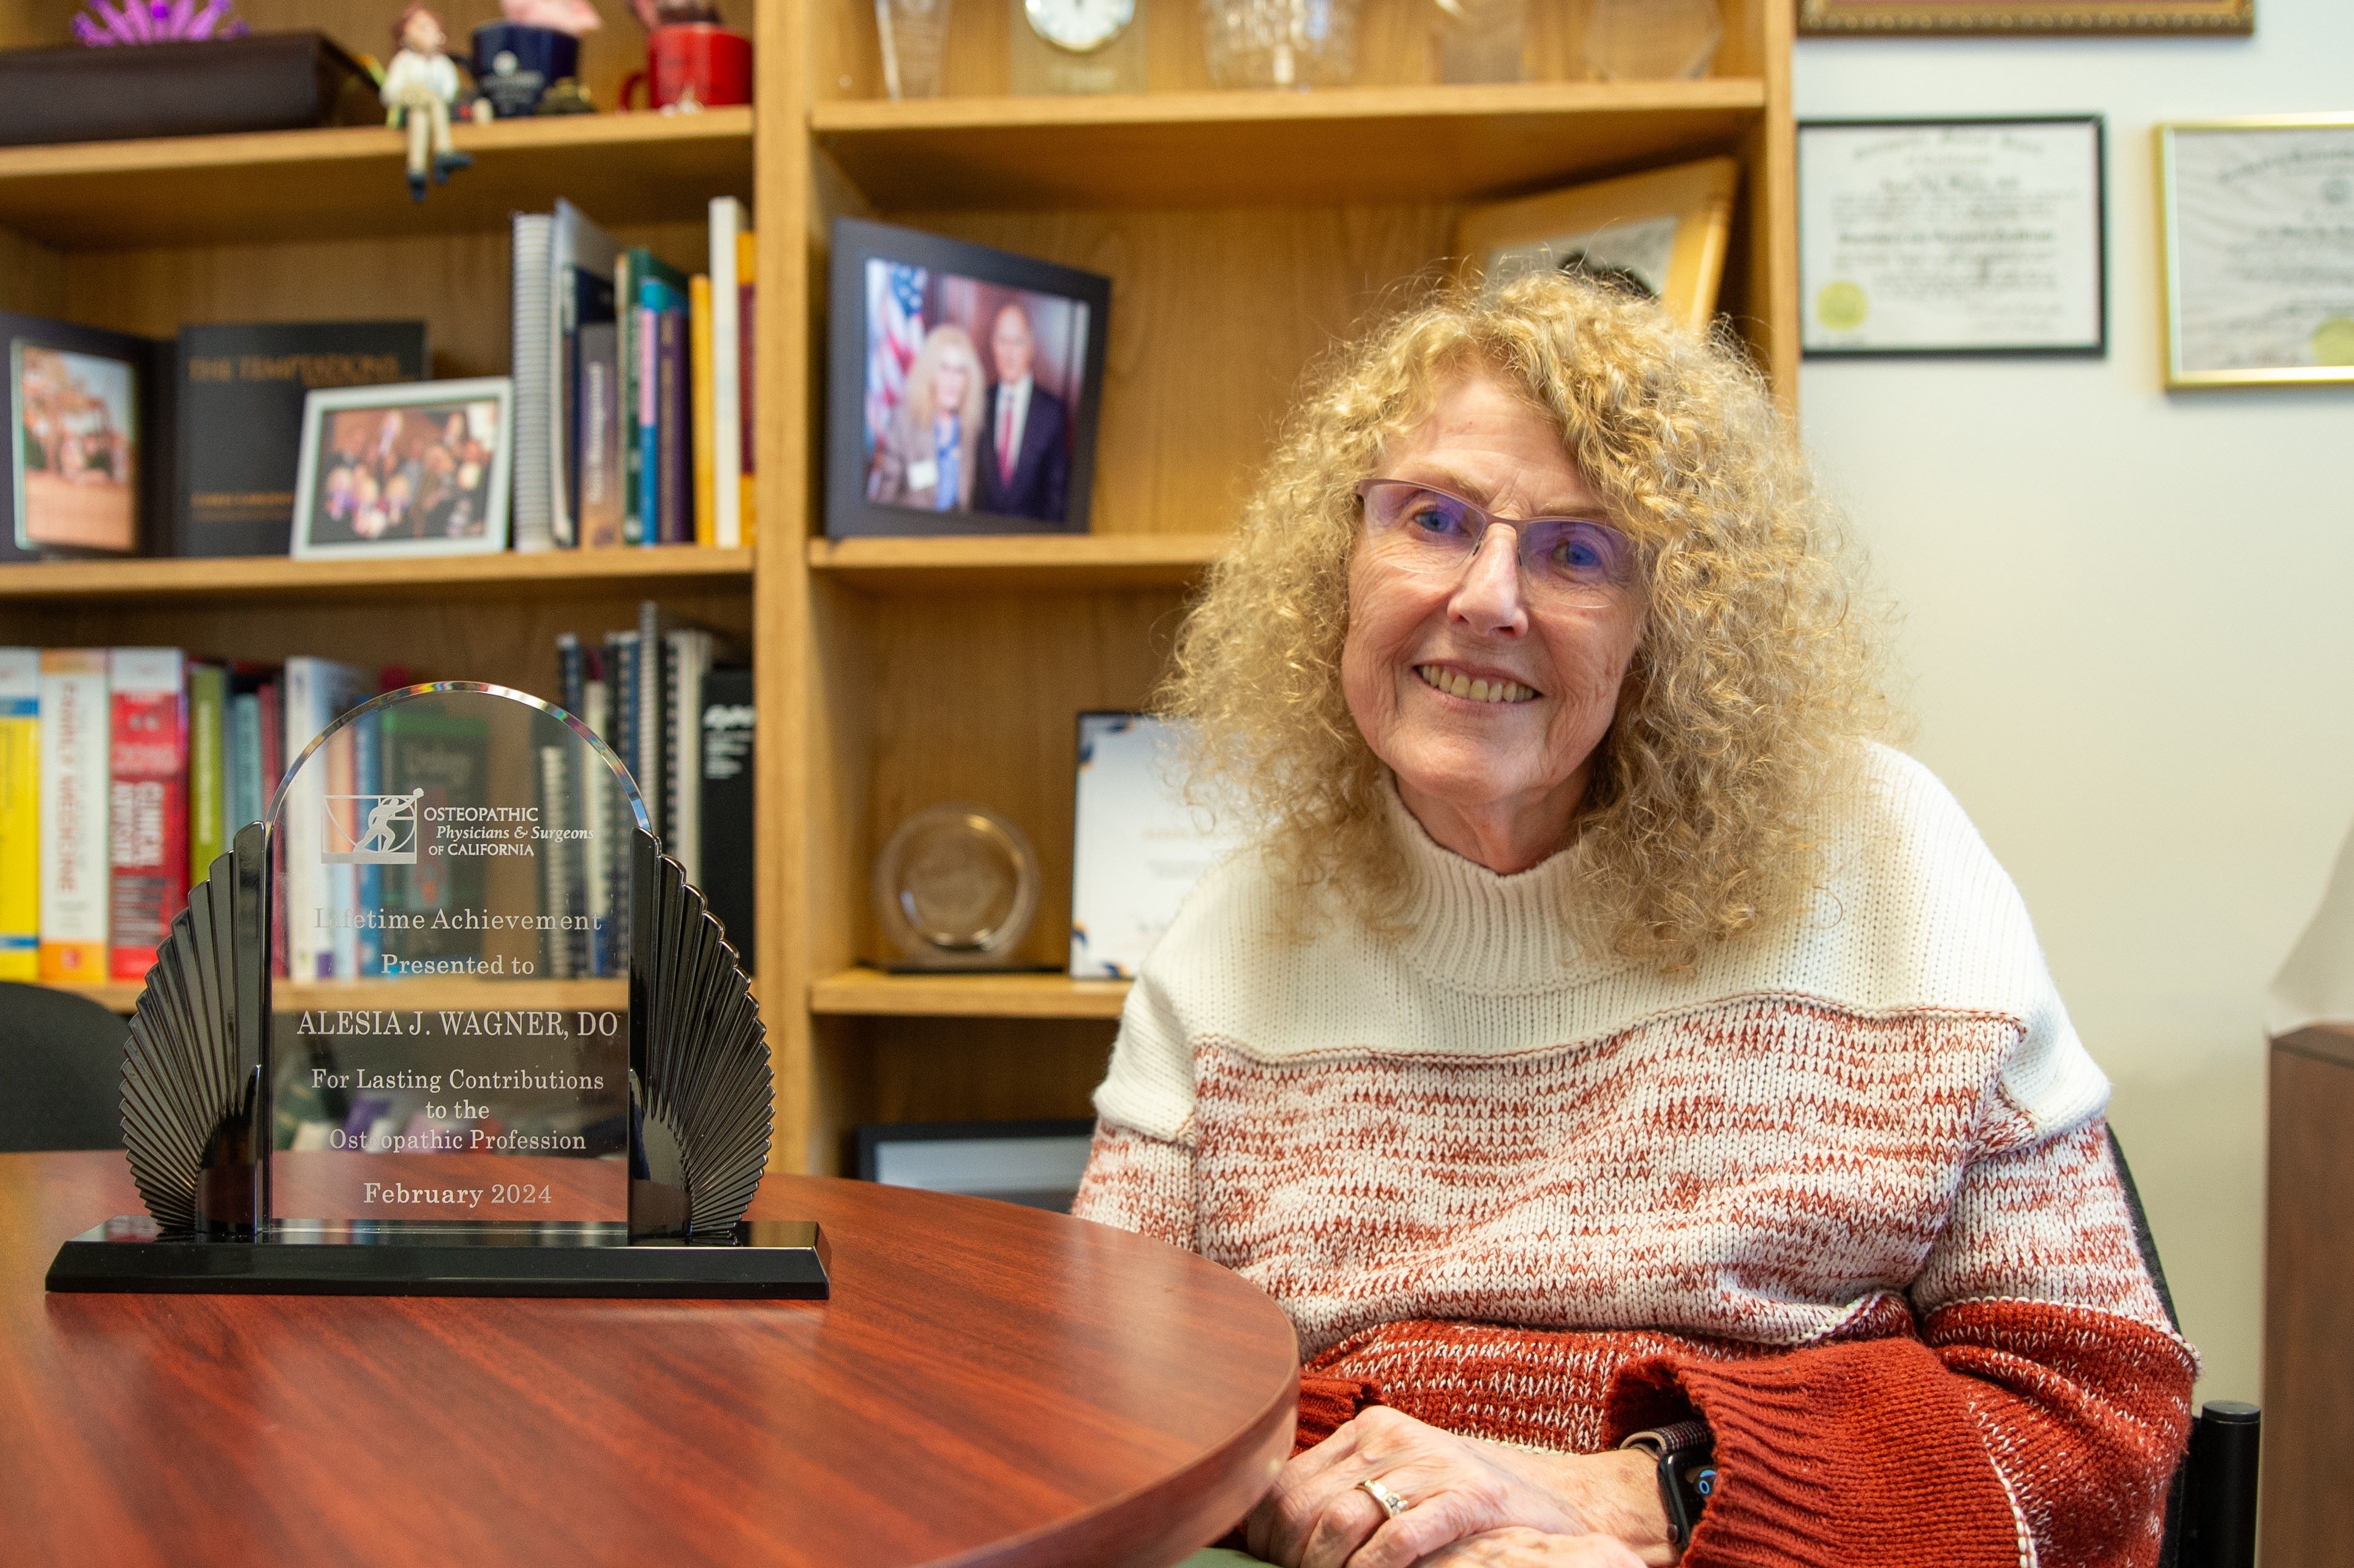 Dr. Alesia Wagner sits at a wooden table next to her lifetime achievement award